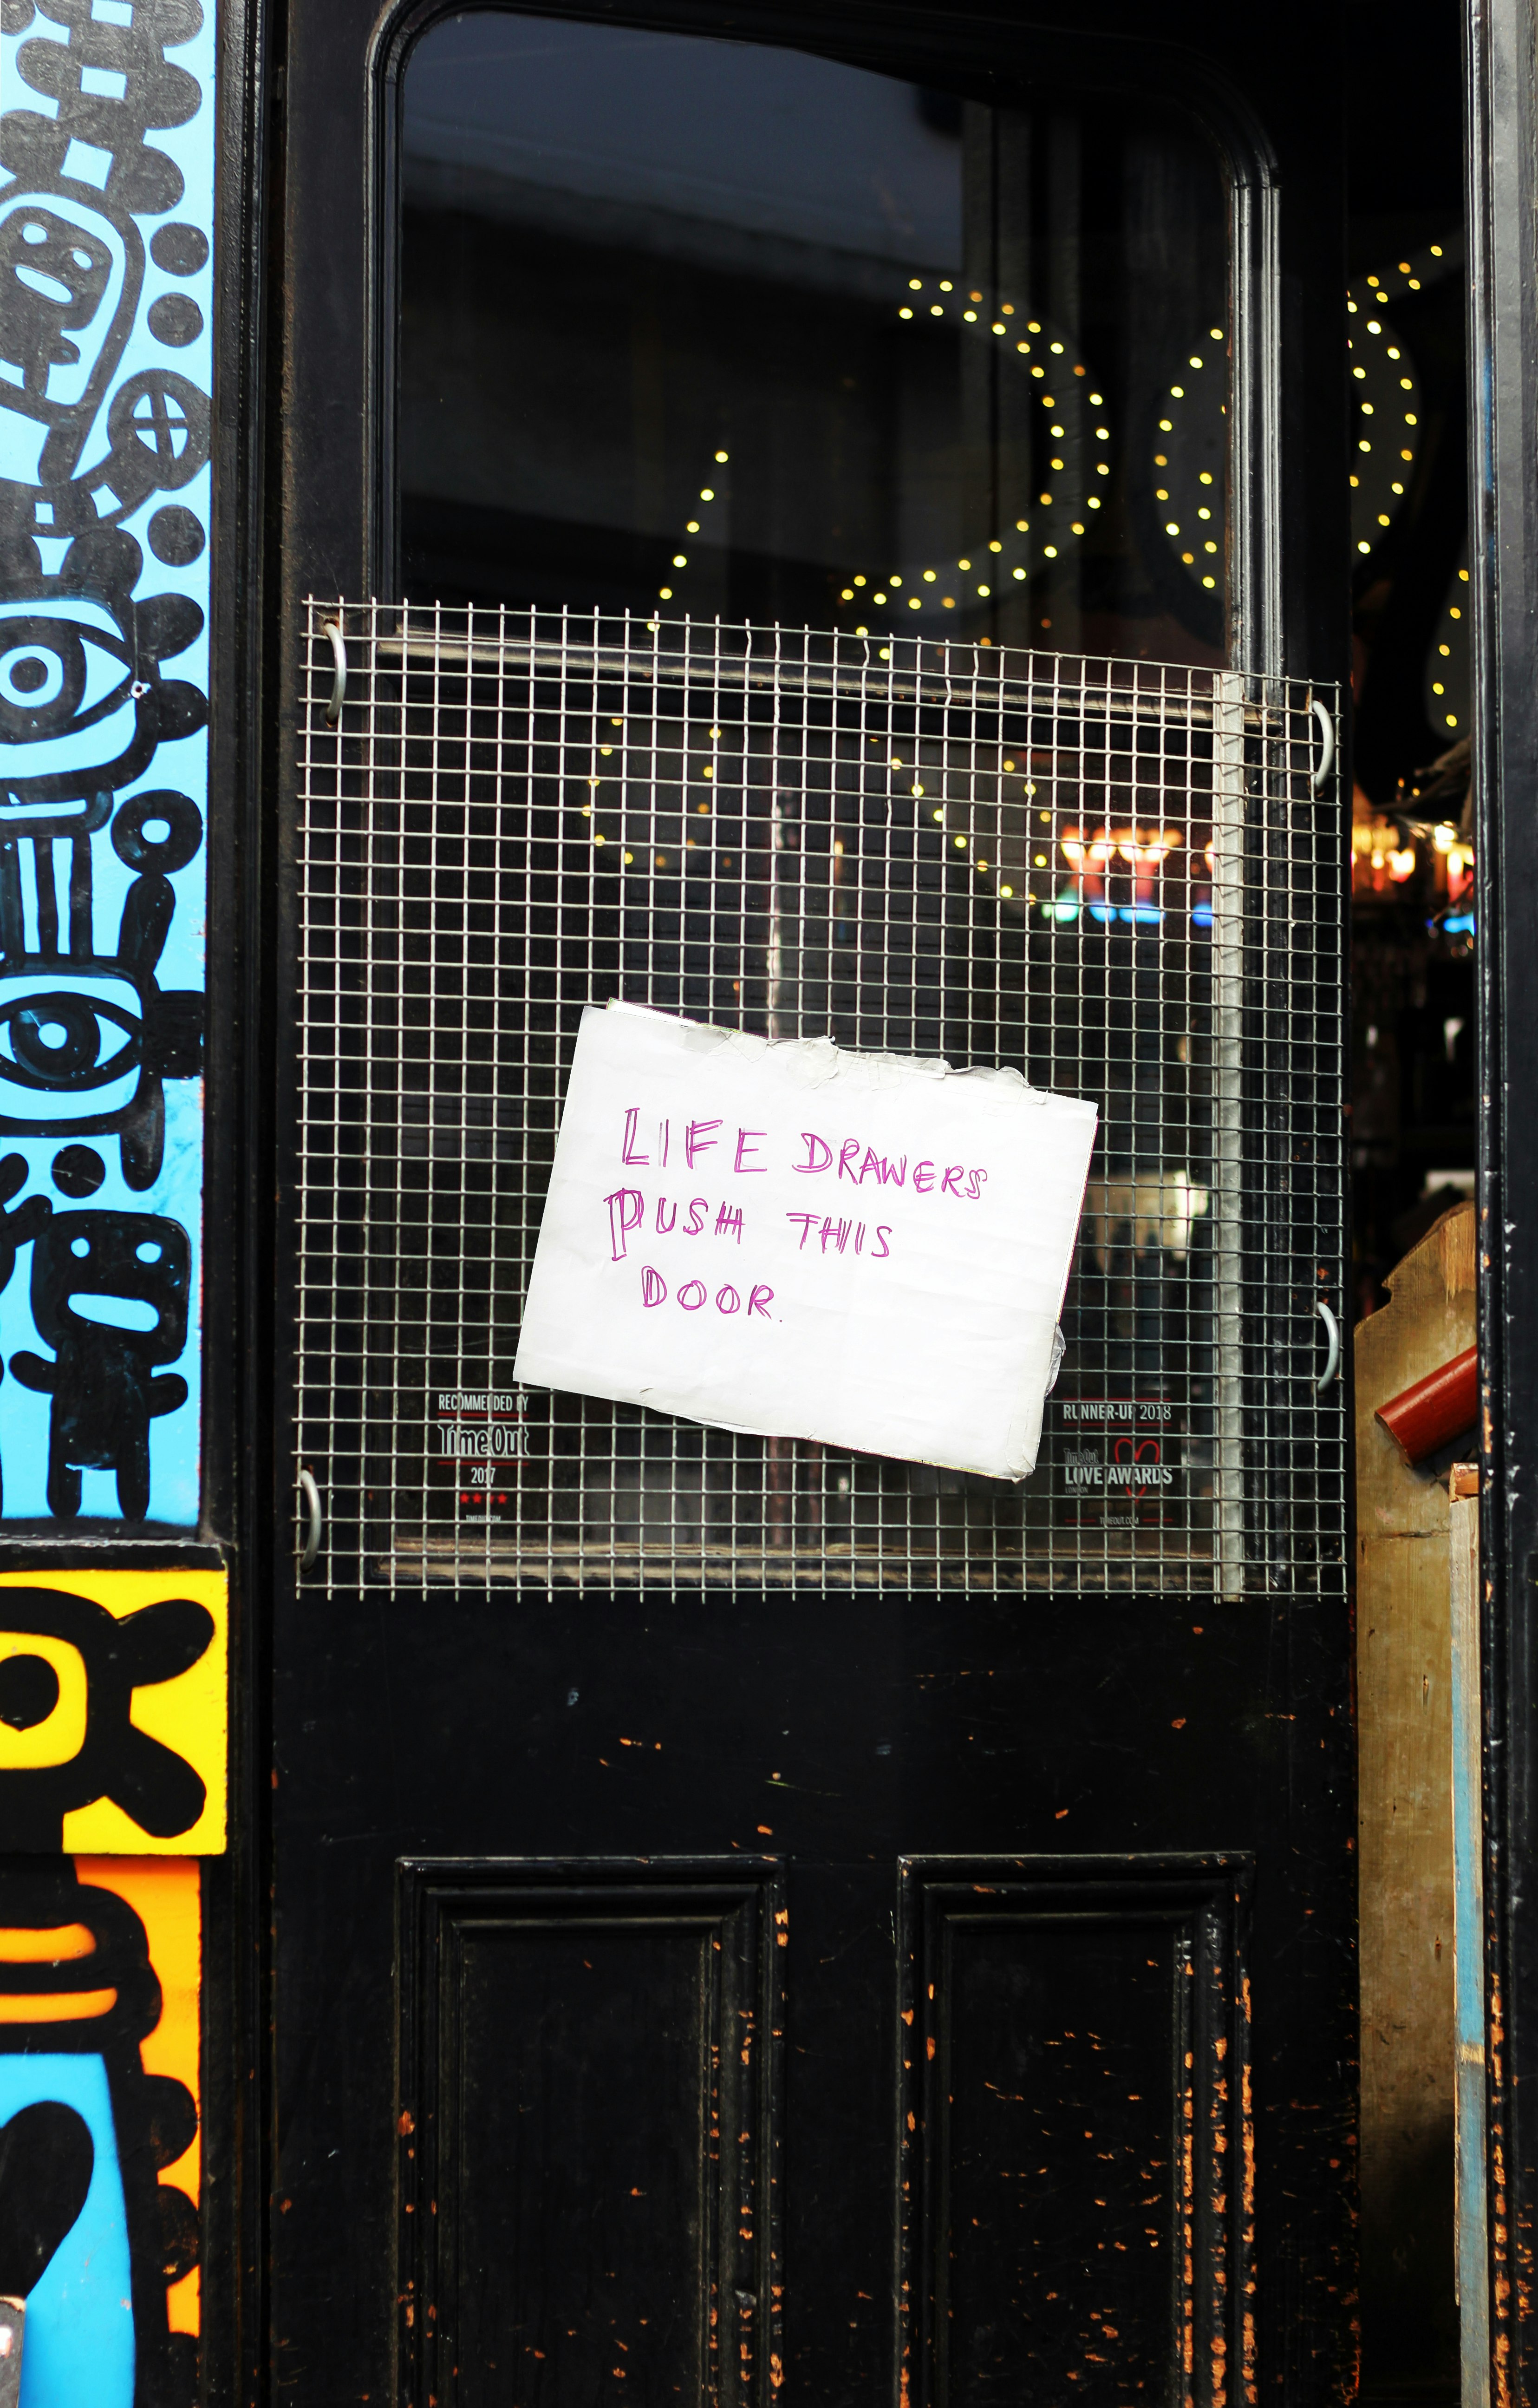 'Life drawers push this door.' The door of a Mexican Bar at Lower Marsh, London.